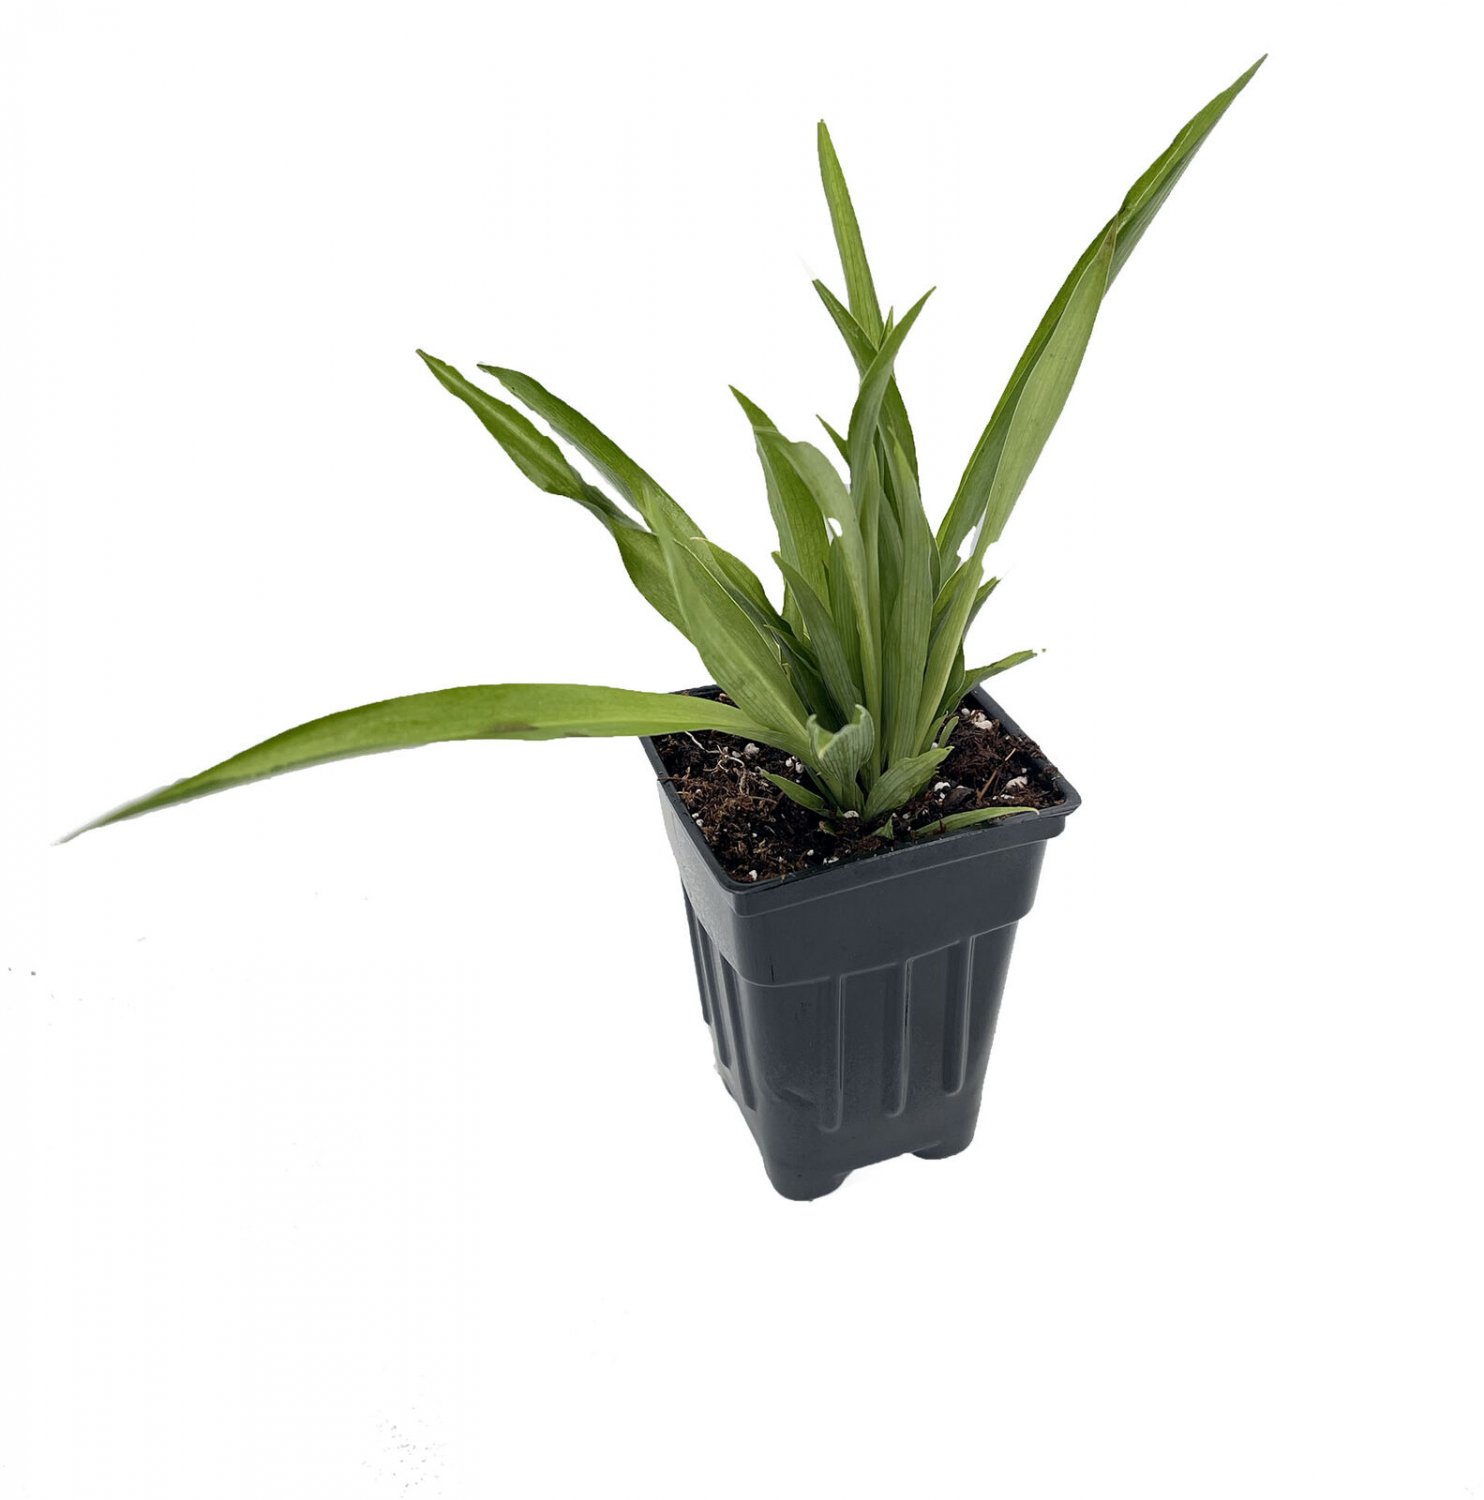 Shamrock Green Spider Plant - Easy to Grow - Cleans the Air - 2.5" Pot